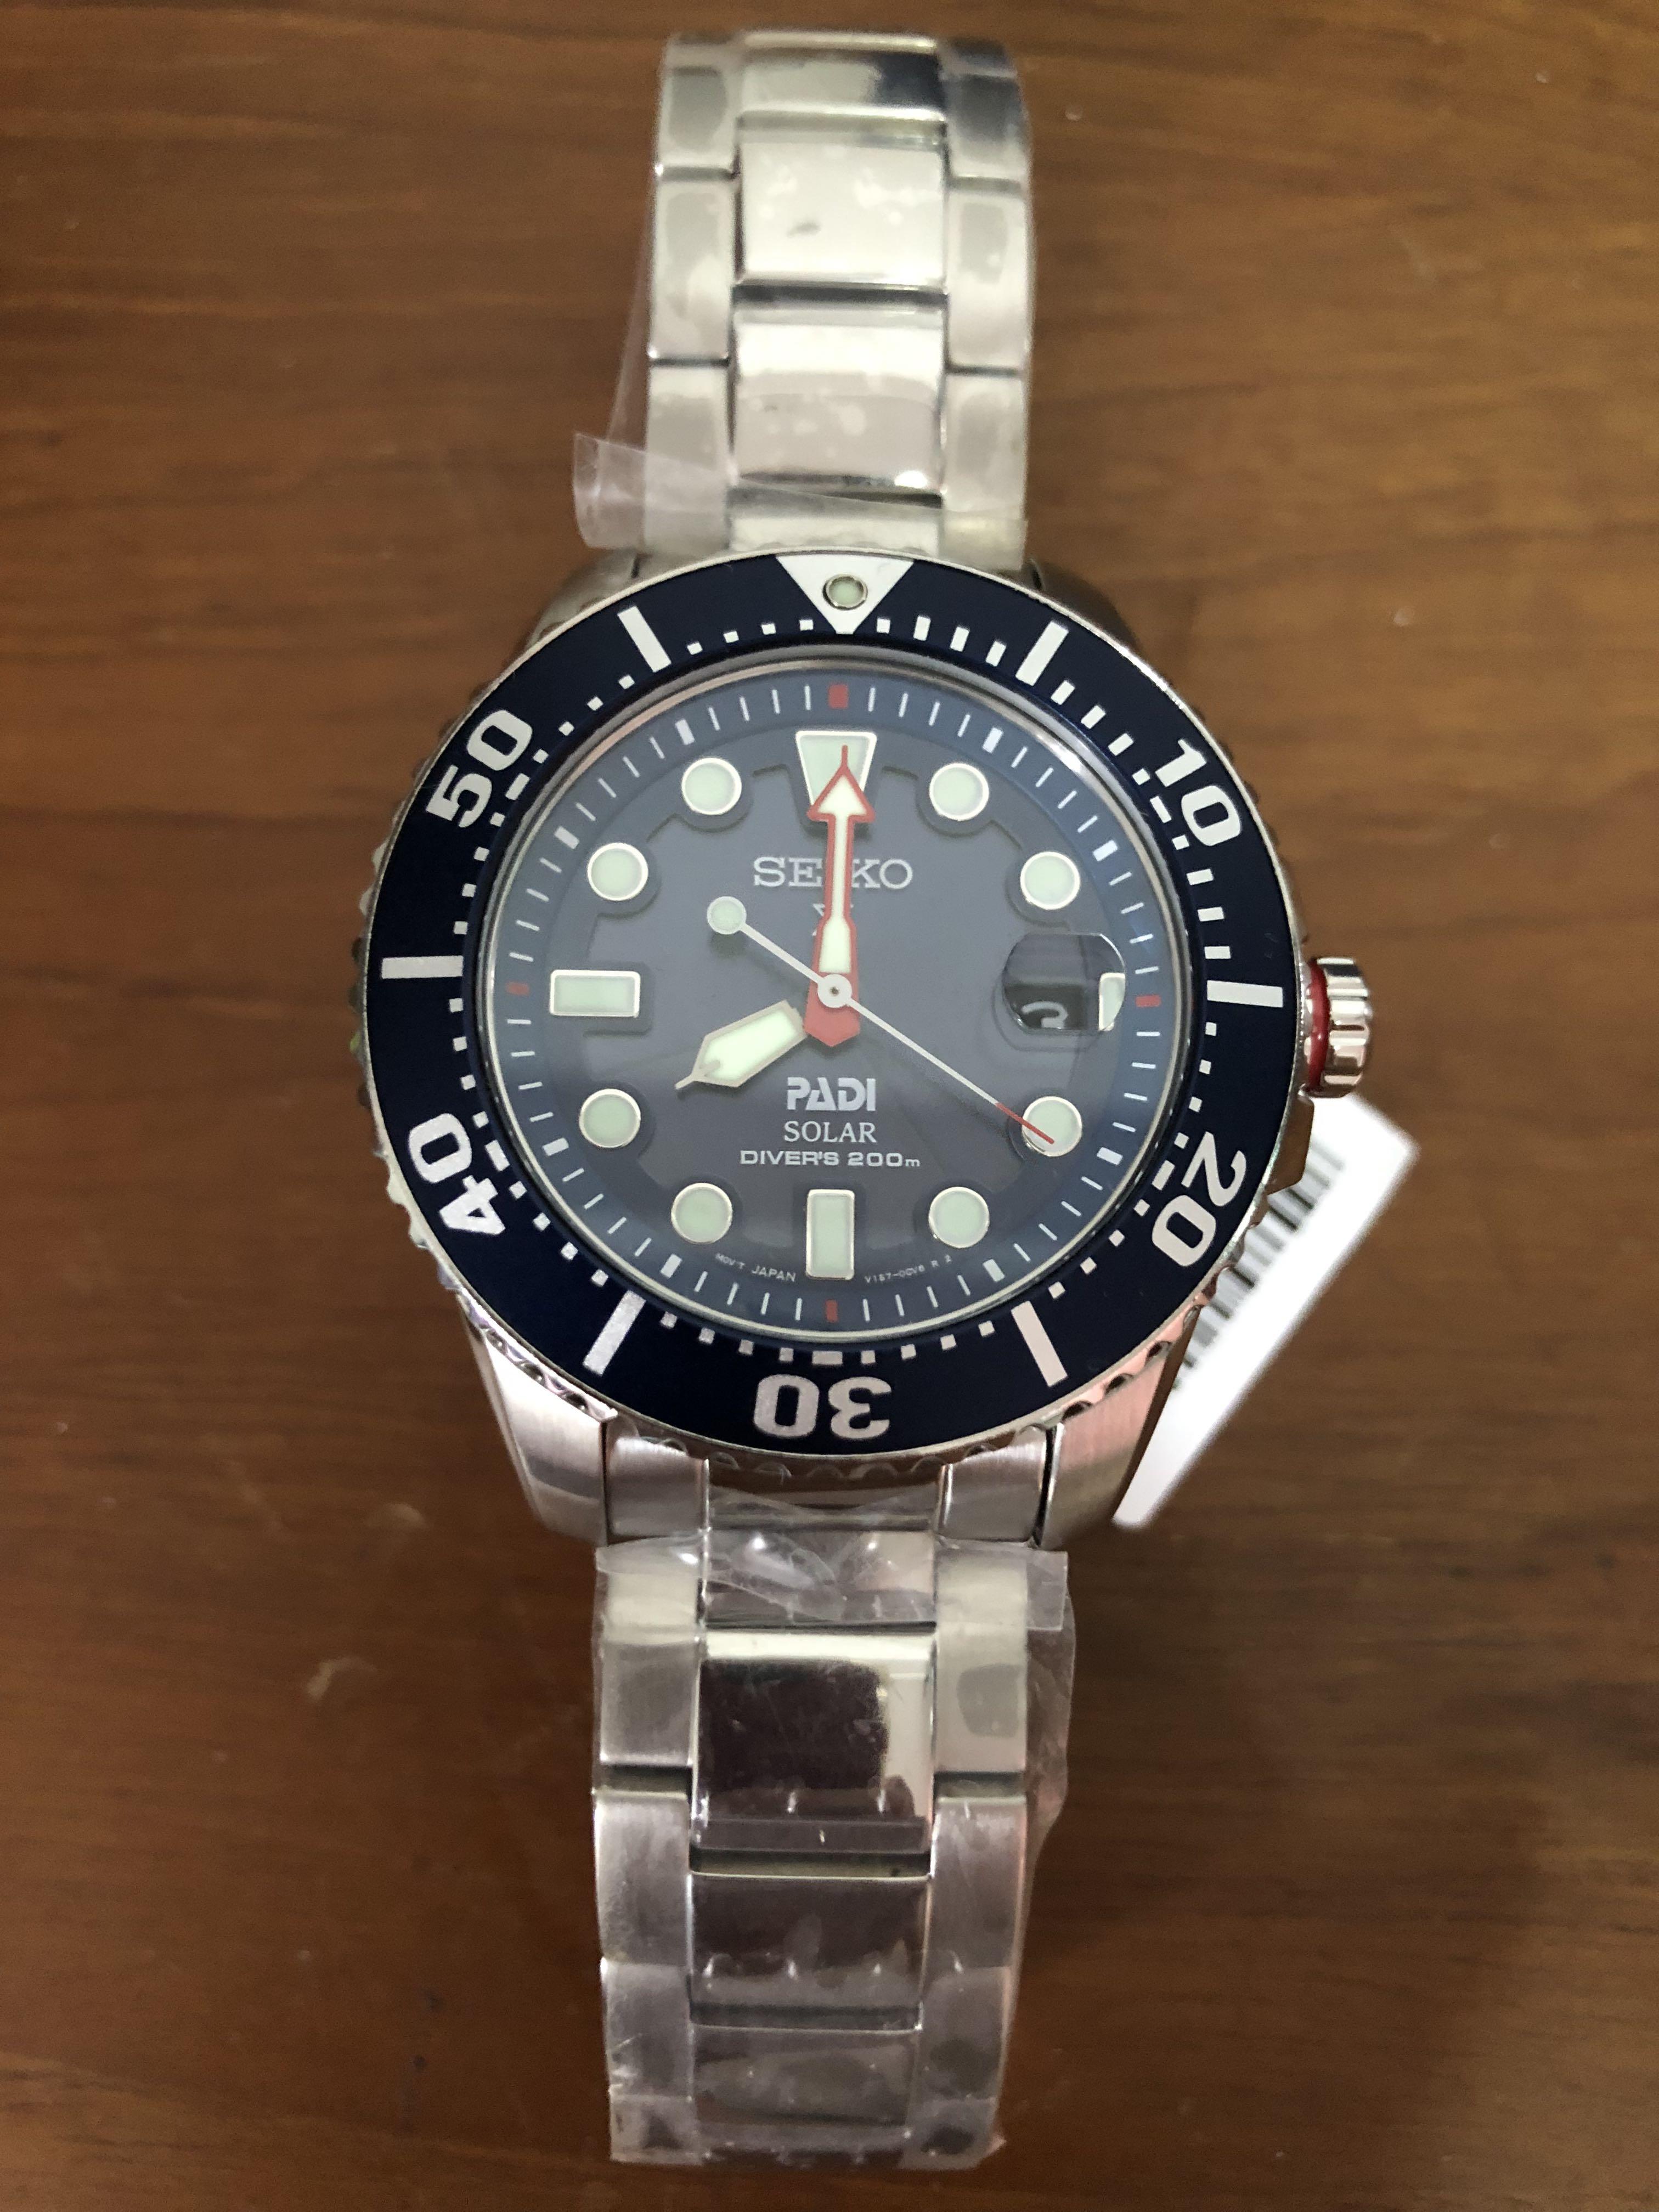 New-Blue Seiko Solar Mens Prospex PADI edition Diver Stainless Steel ISO  Watch SNE435, Men's Fashion, Watches & Accessories, Watches on Carousell